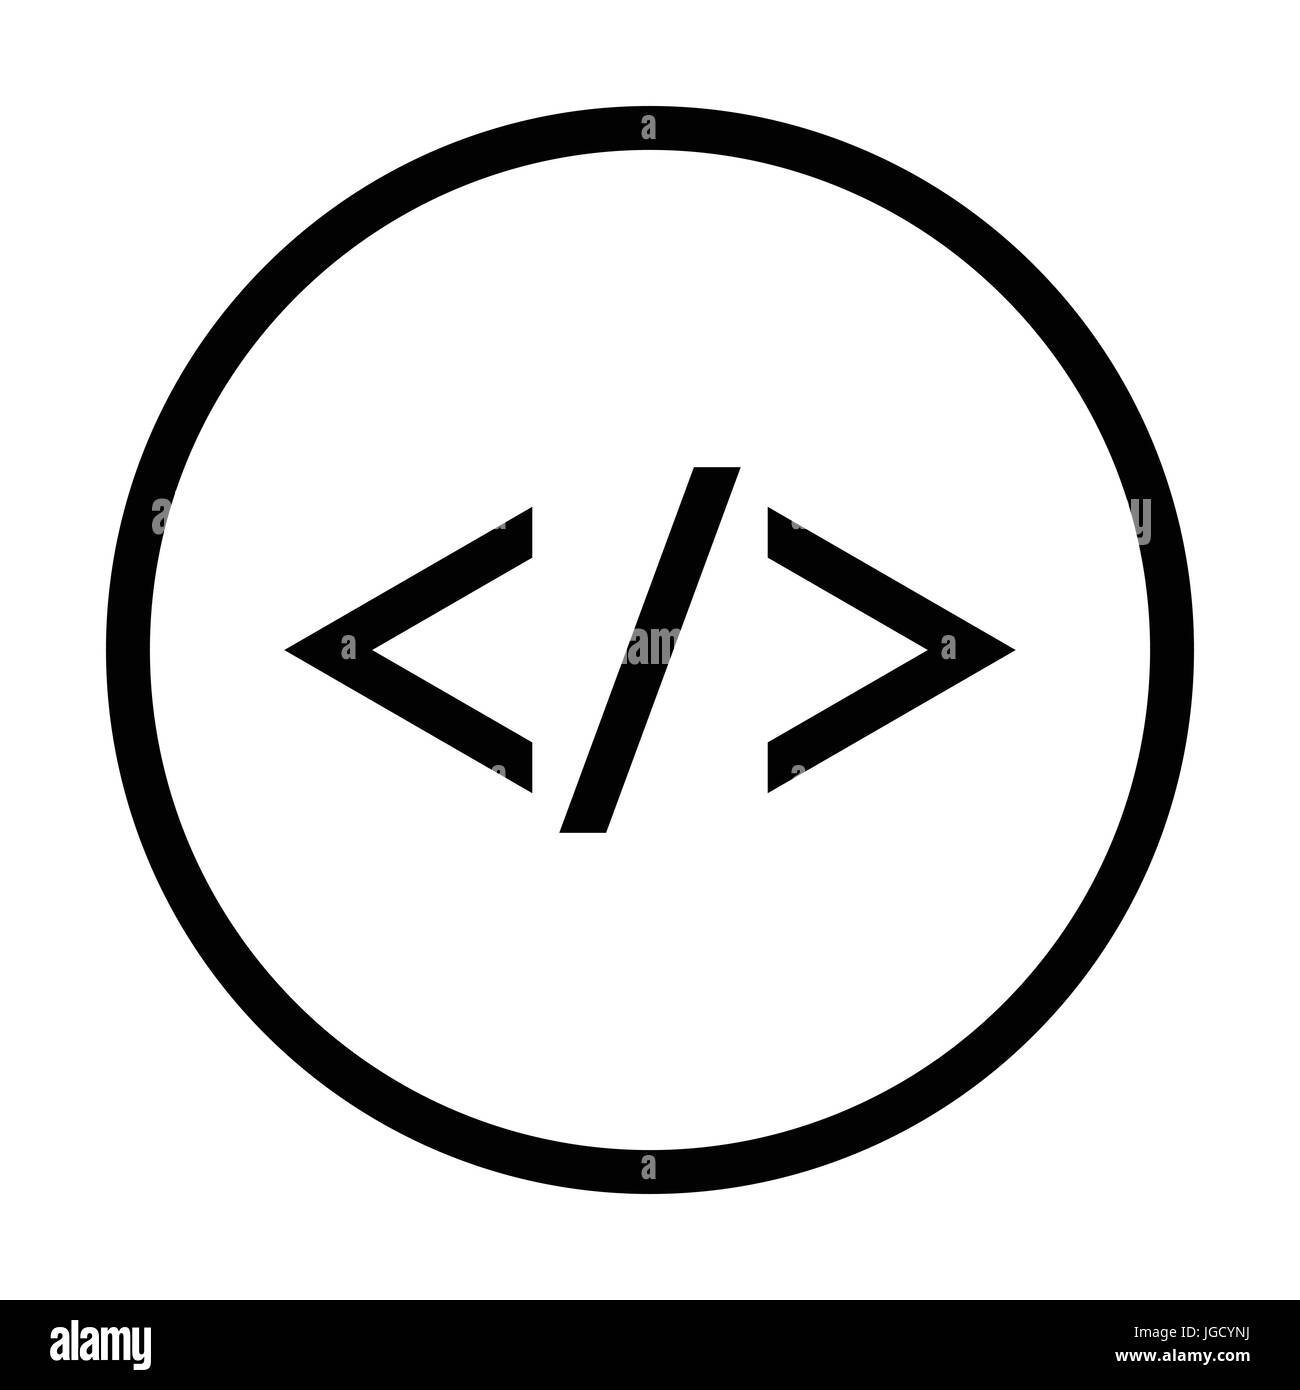 Code icon, iconic symbol inside a circle, on white background. Vector Iconic Design. Stock Vector